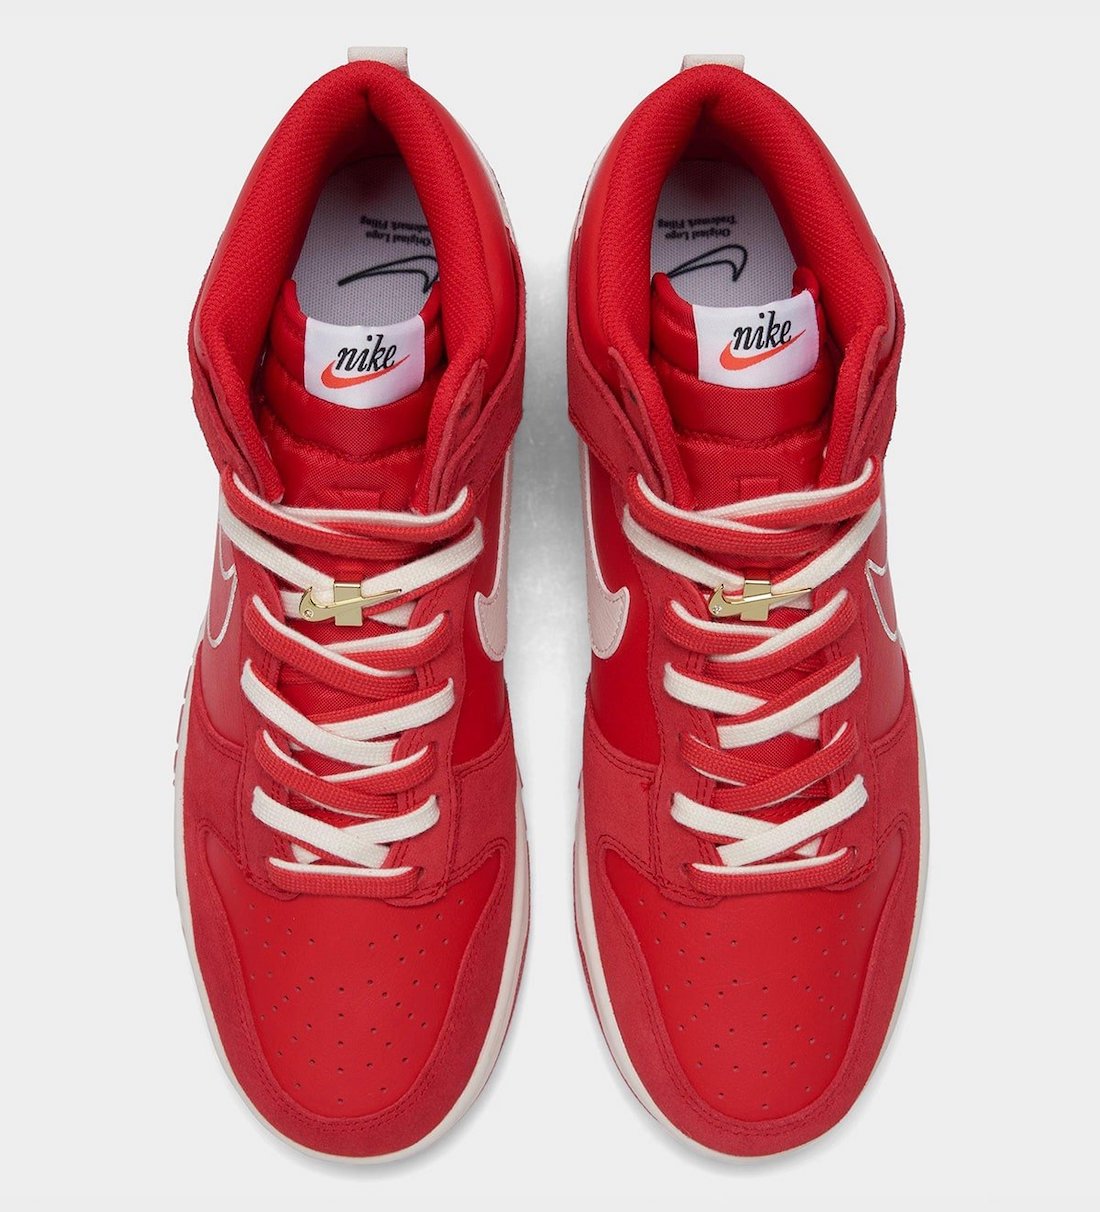 Nike Dunk High First Use University Red Sail DH0960-600 Release Date Info